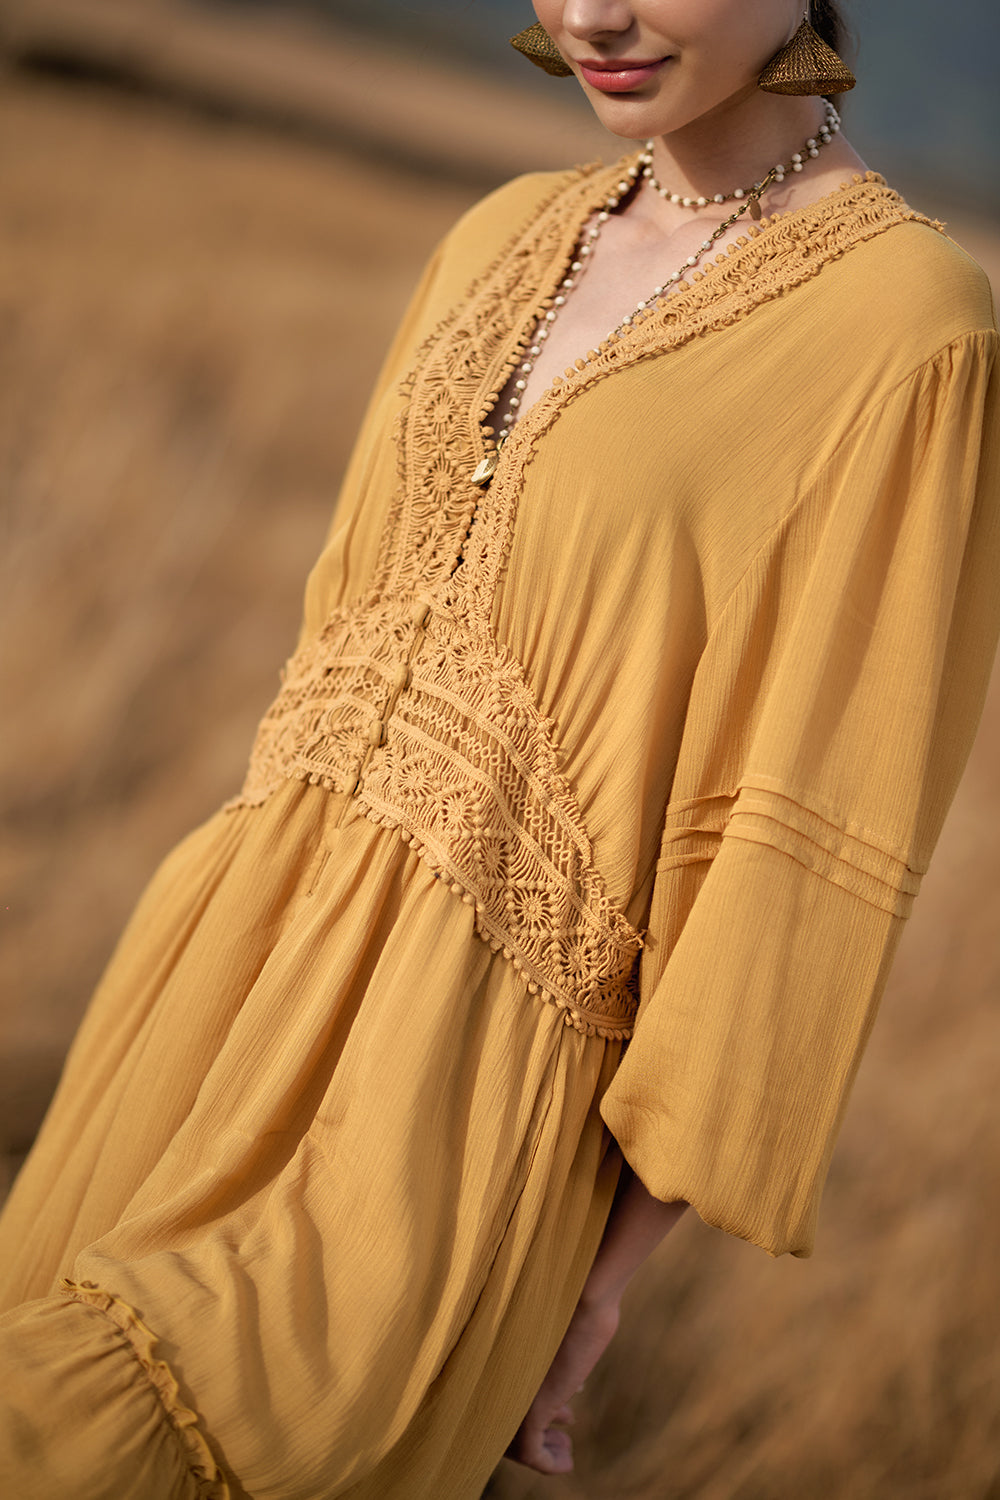 Maribelle Dress - Saffron Gold - The Fields of Gold by Tulle and Batiste